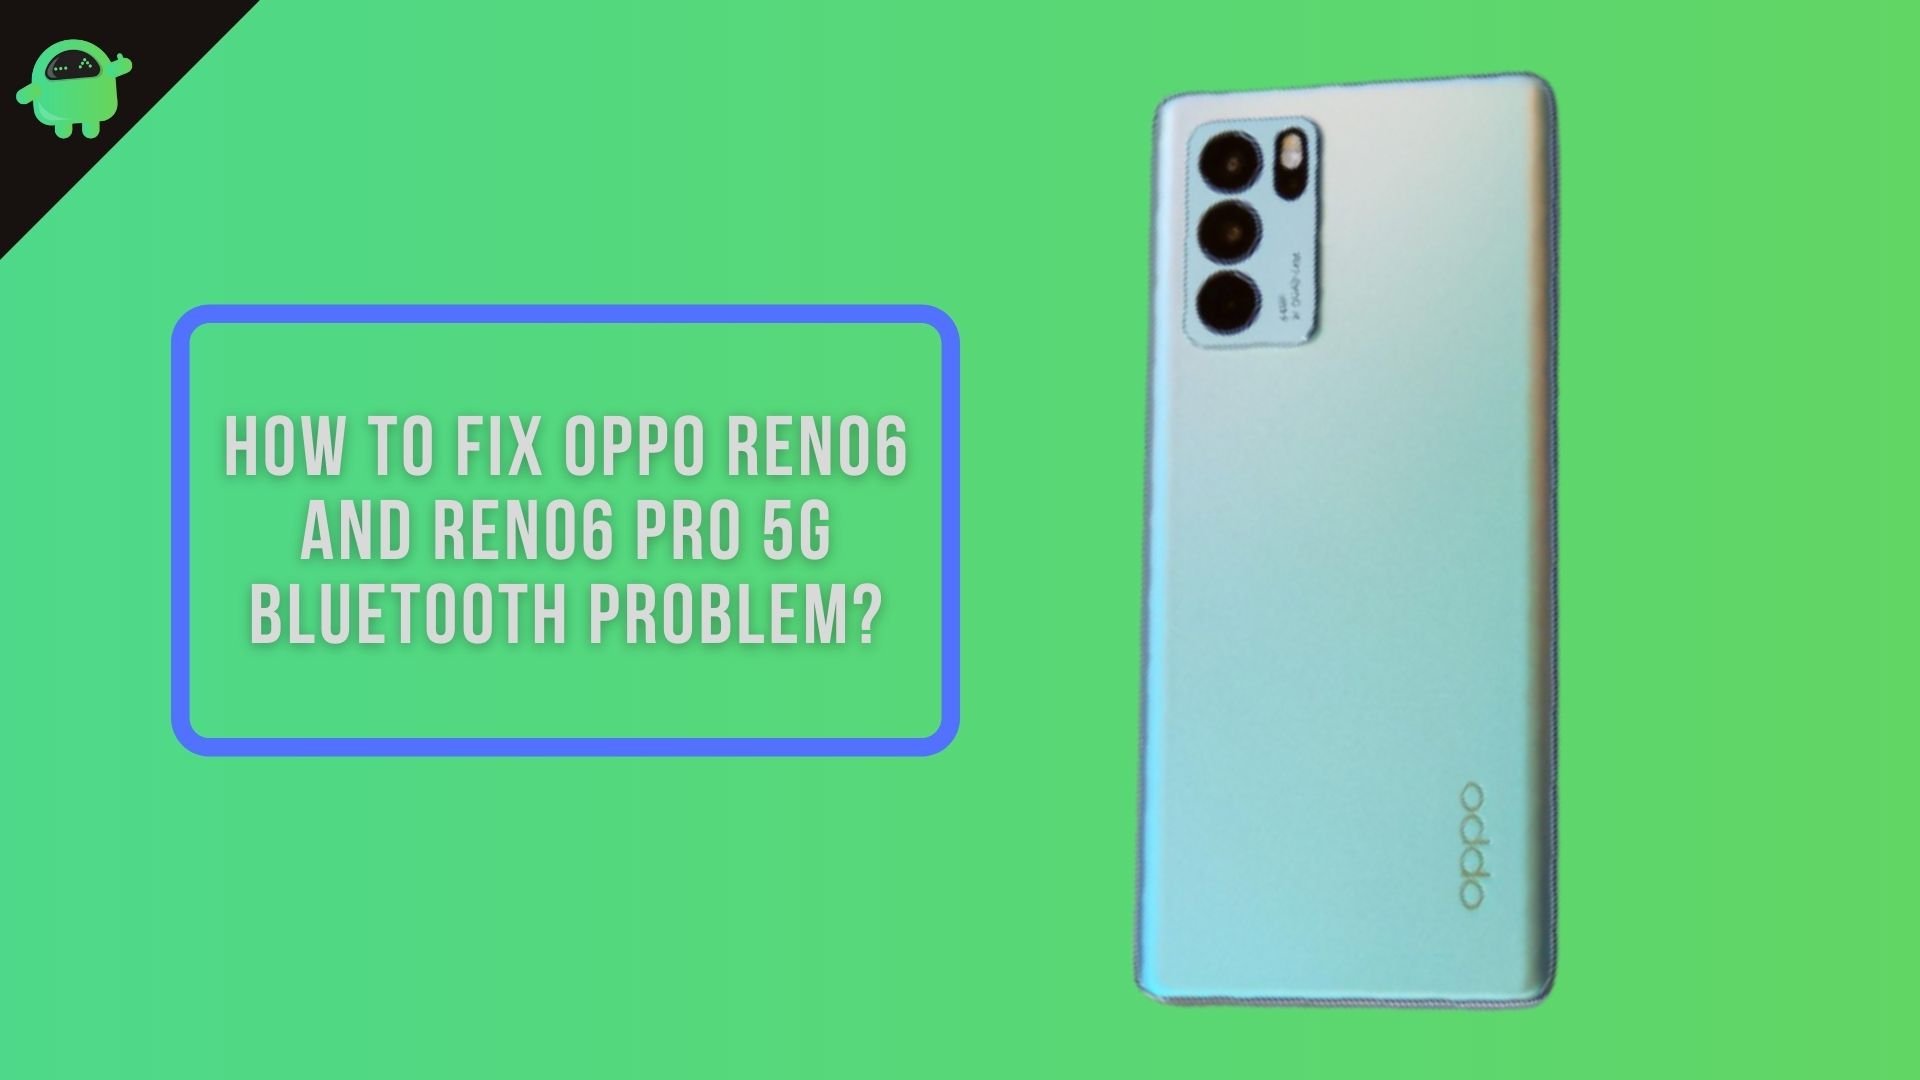 How to fix Oppo Reno6 and Reno6 Pro 5G Bluetooth Problem?